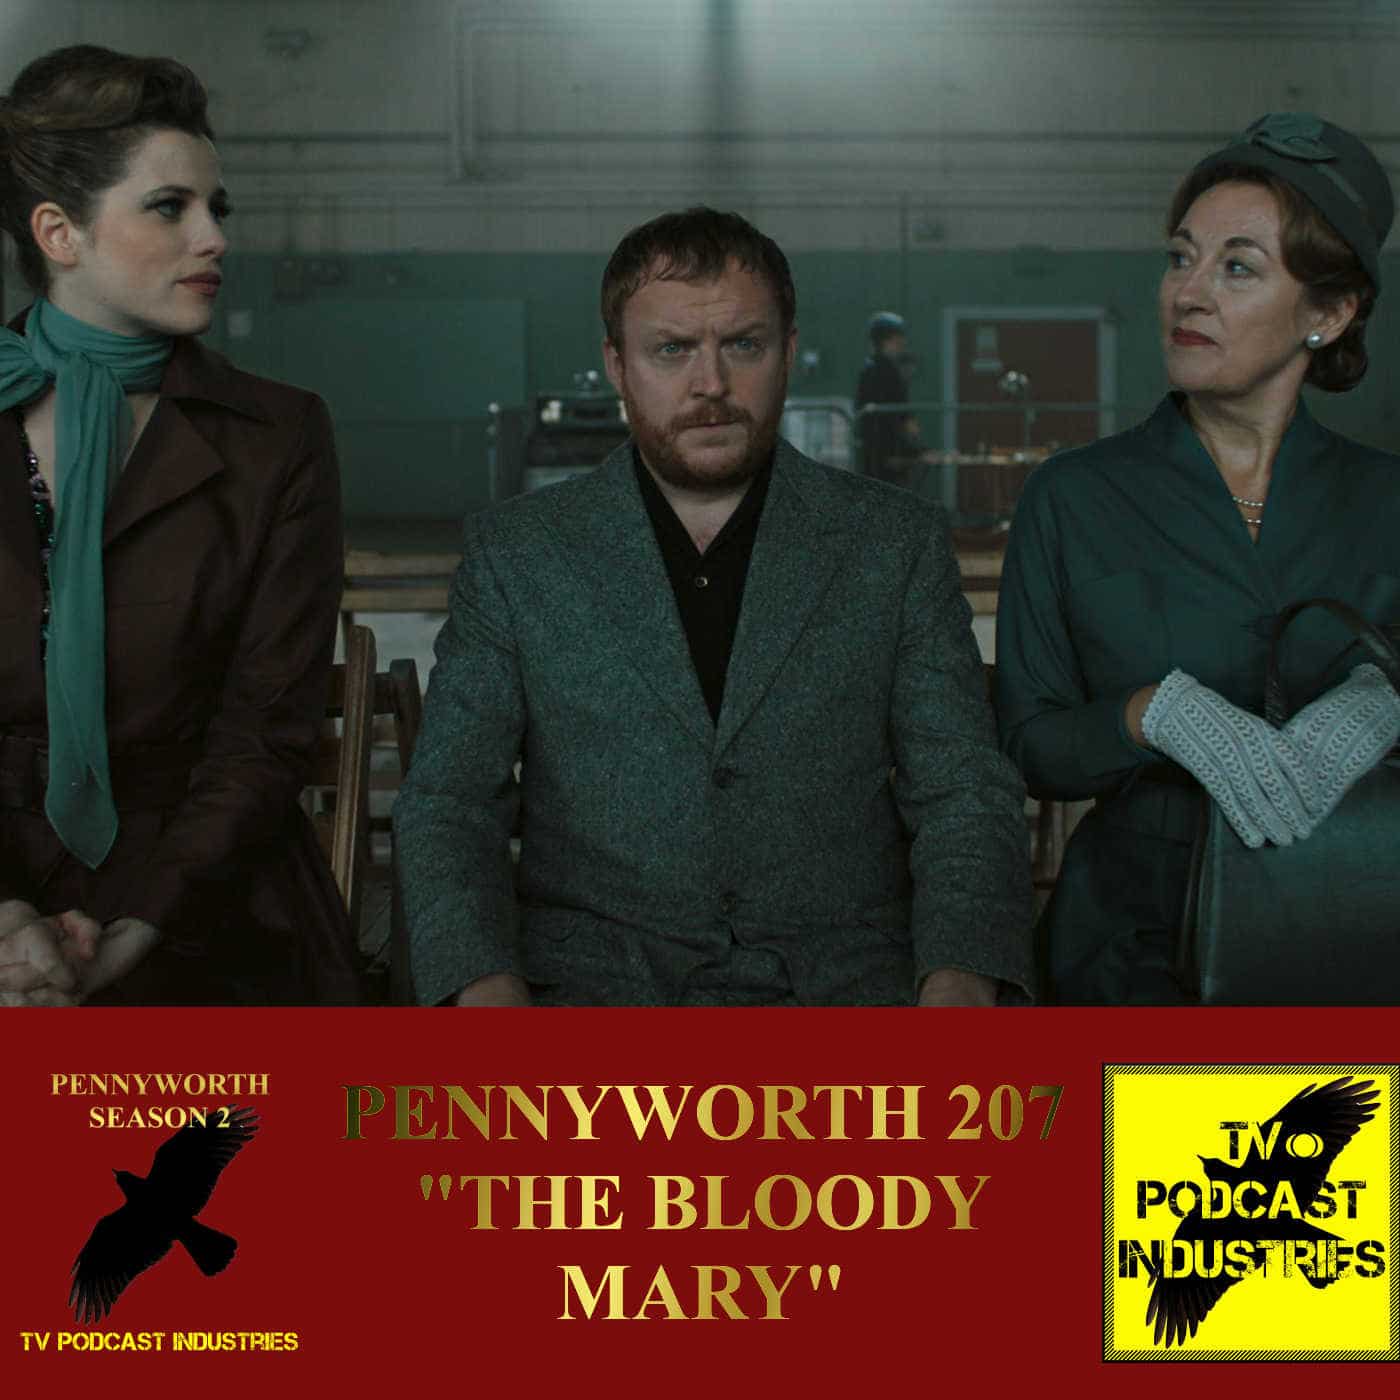 Pennyworth Season 2 Episode 7 "The Bloody Mary" Podcast by TV Podcast Industries